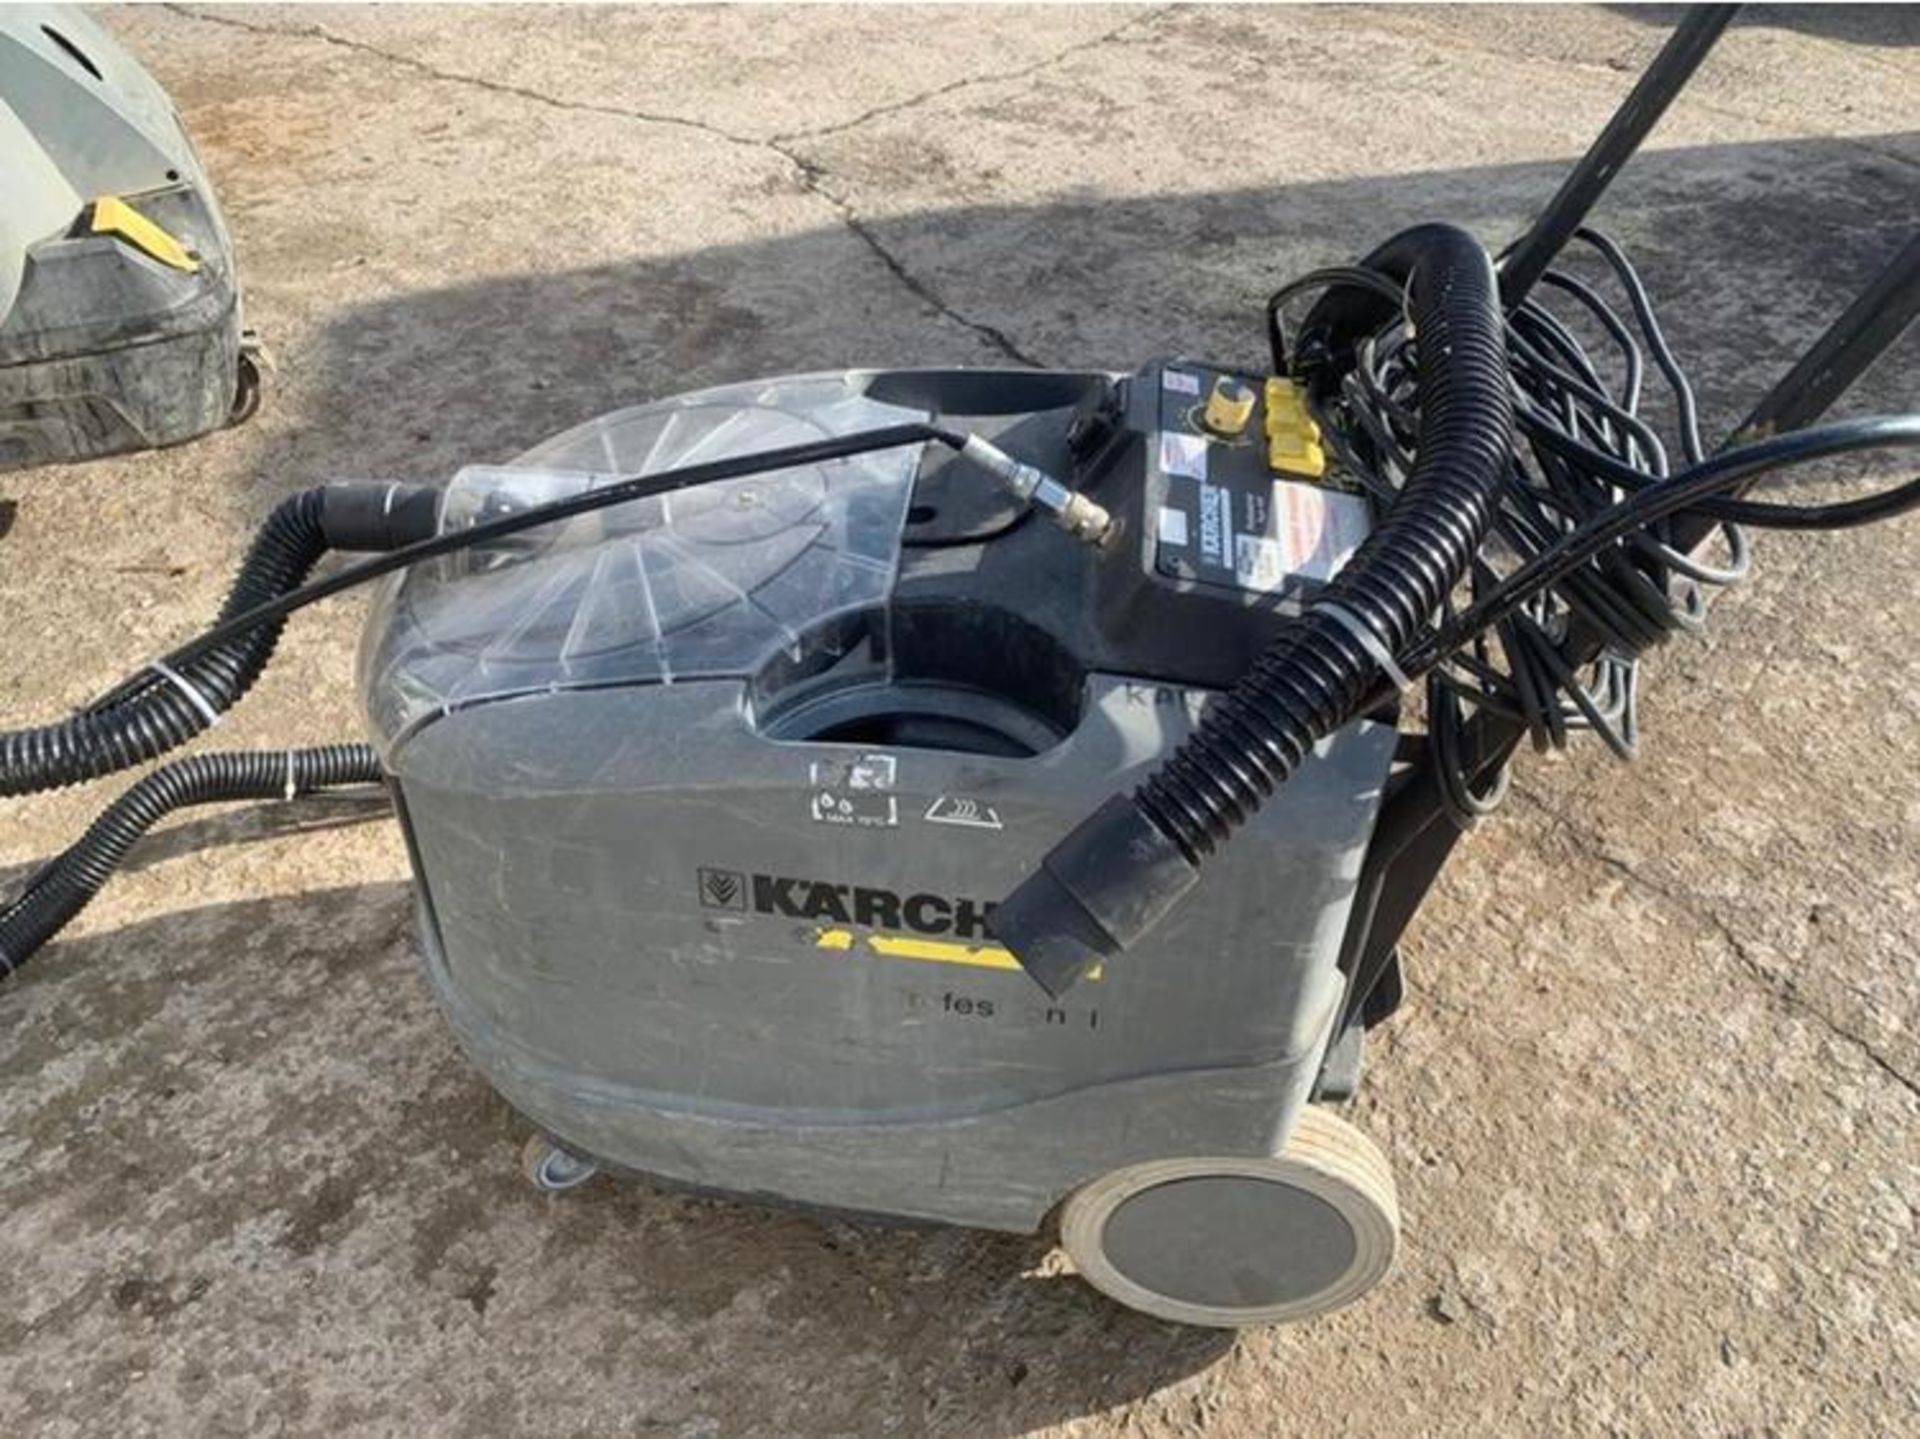 KARCHER WET AND DRY COMMERCIAL PUZZI 240V.LOCATION N IRELAND.